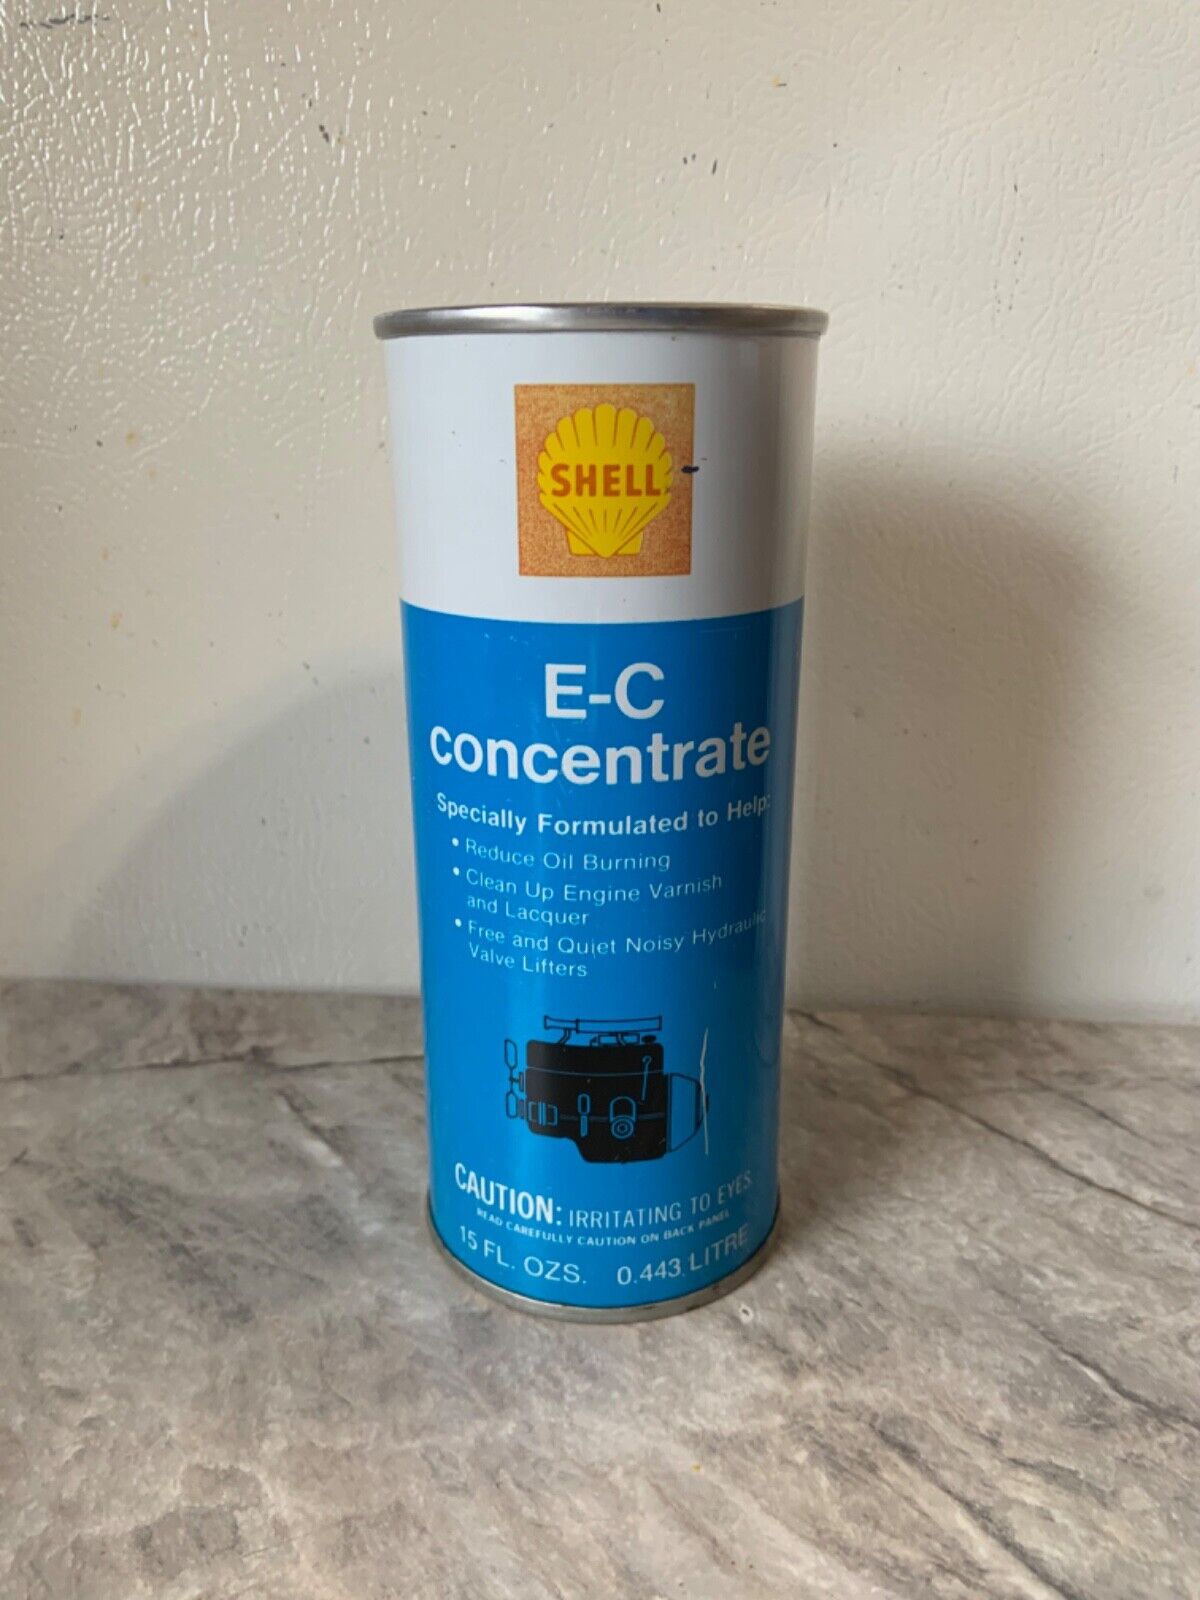 Vintage SHELL E-C CONCENTRATE Engine Cleaner 1-15 oz Metal Can RARE Nice Look